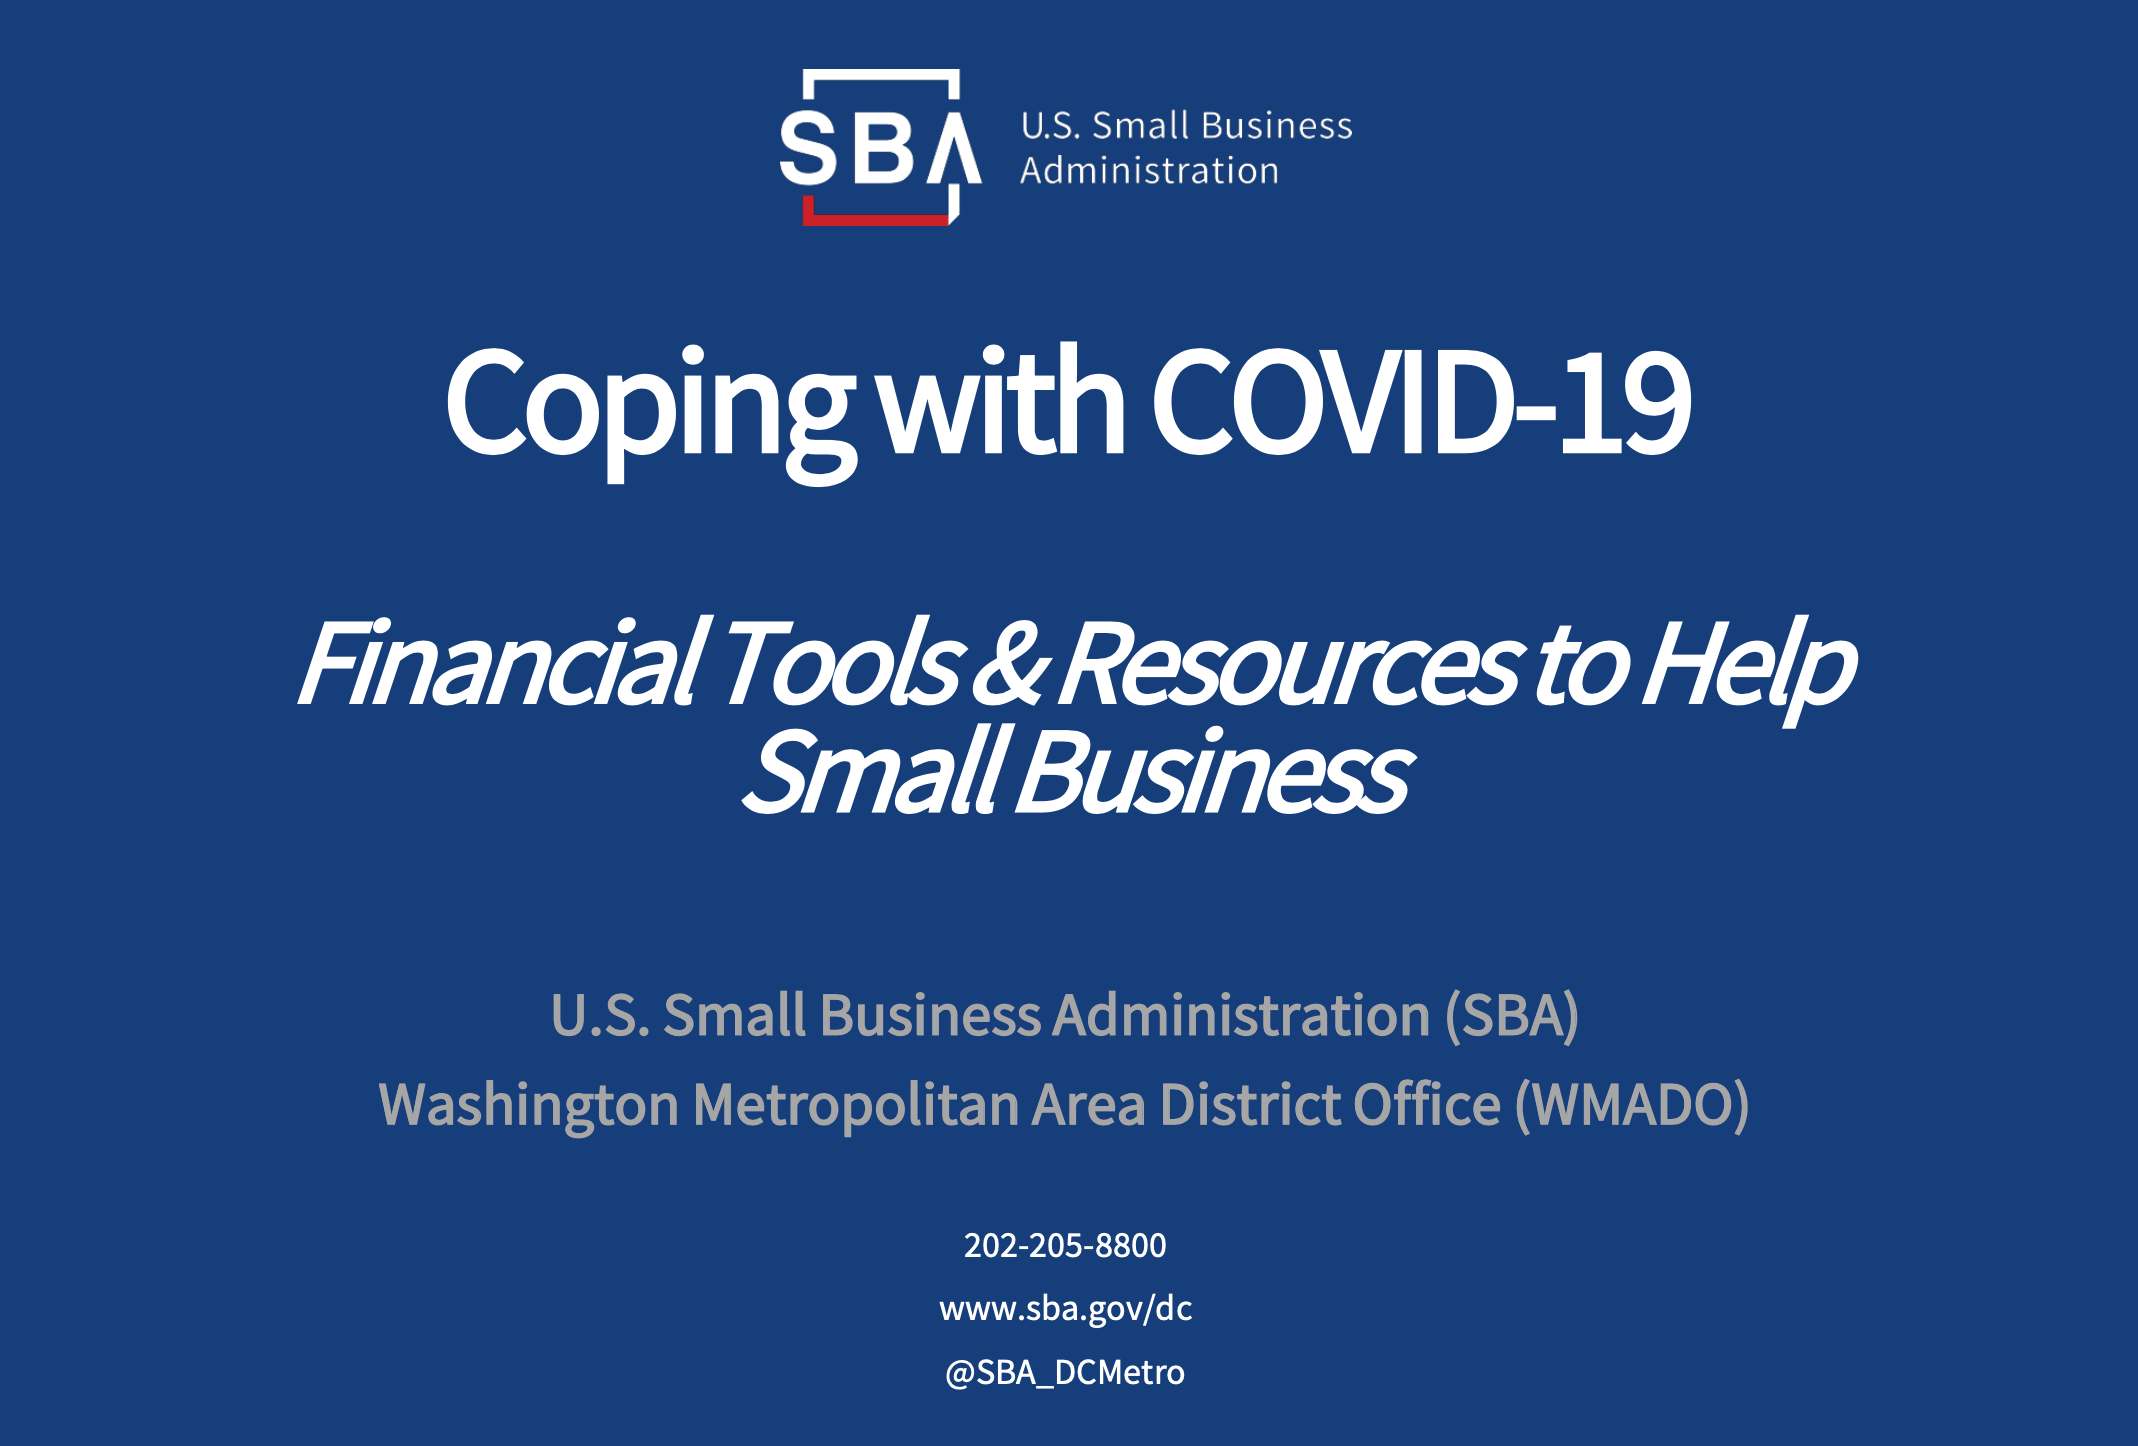 SBA’s Disaster Declaration Makes Loans Available to Small Businesses Due to the Coronavirus (COVID-19)